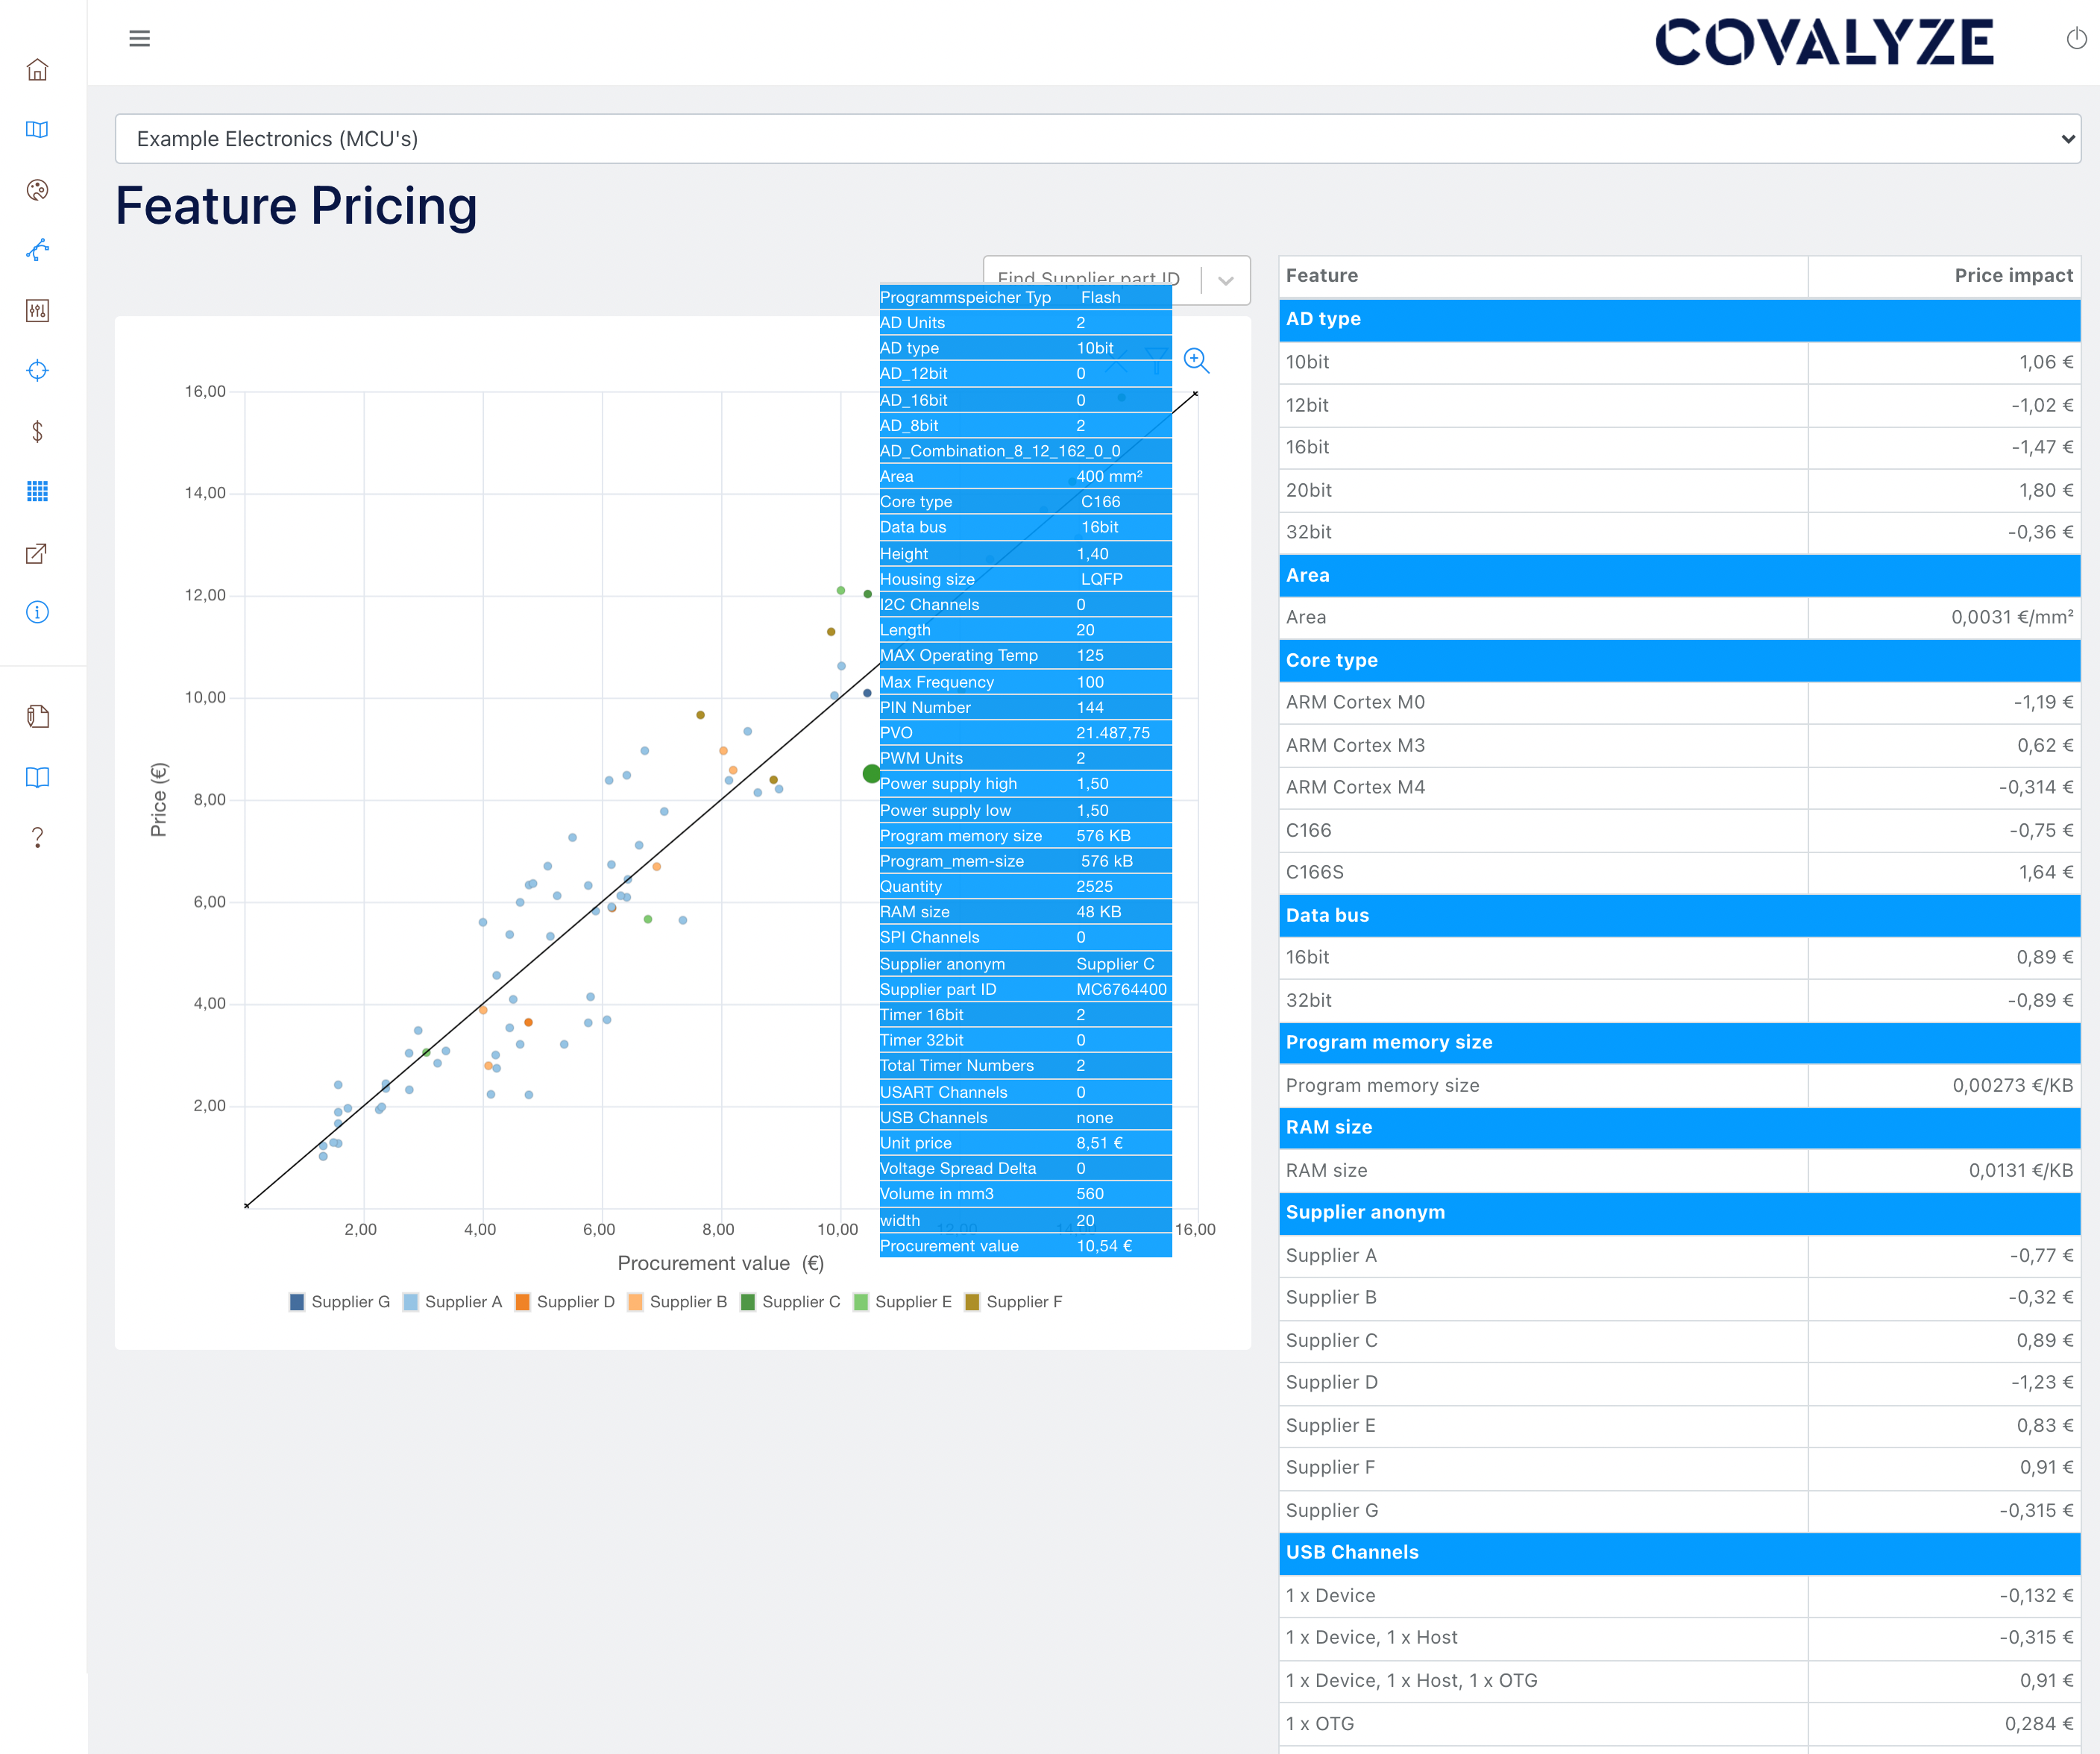 COVALYZE feature pricing